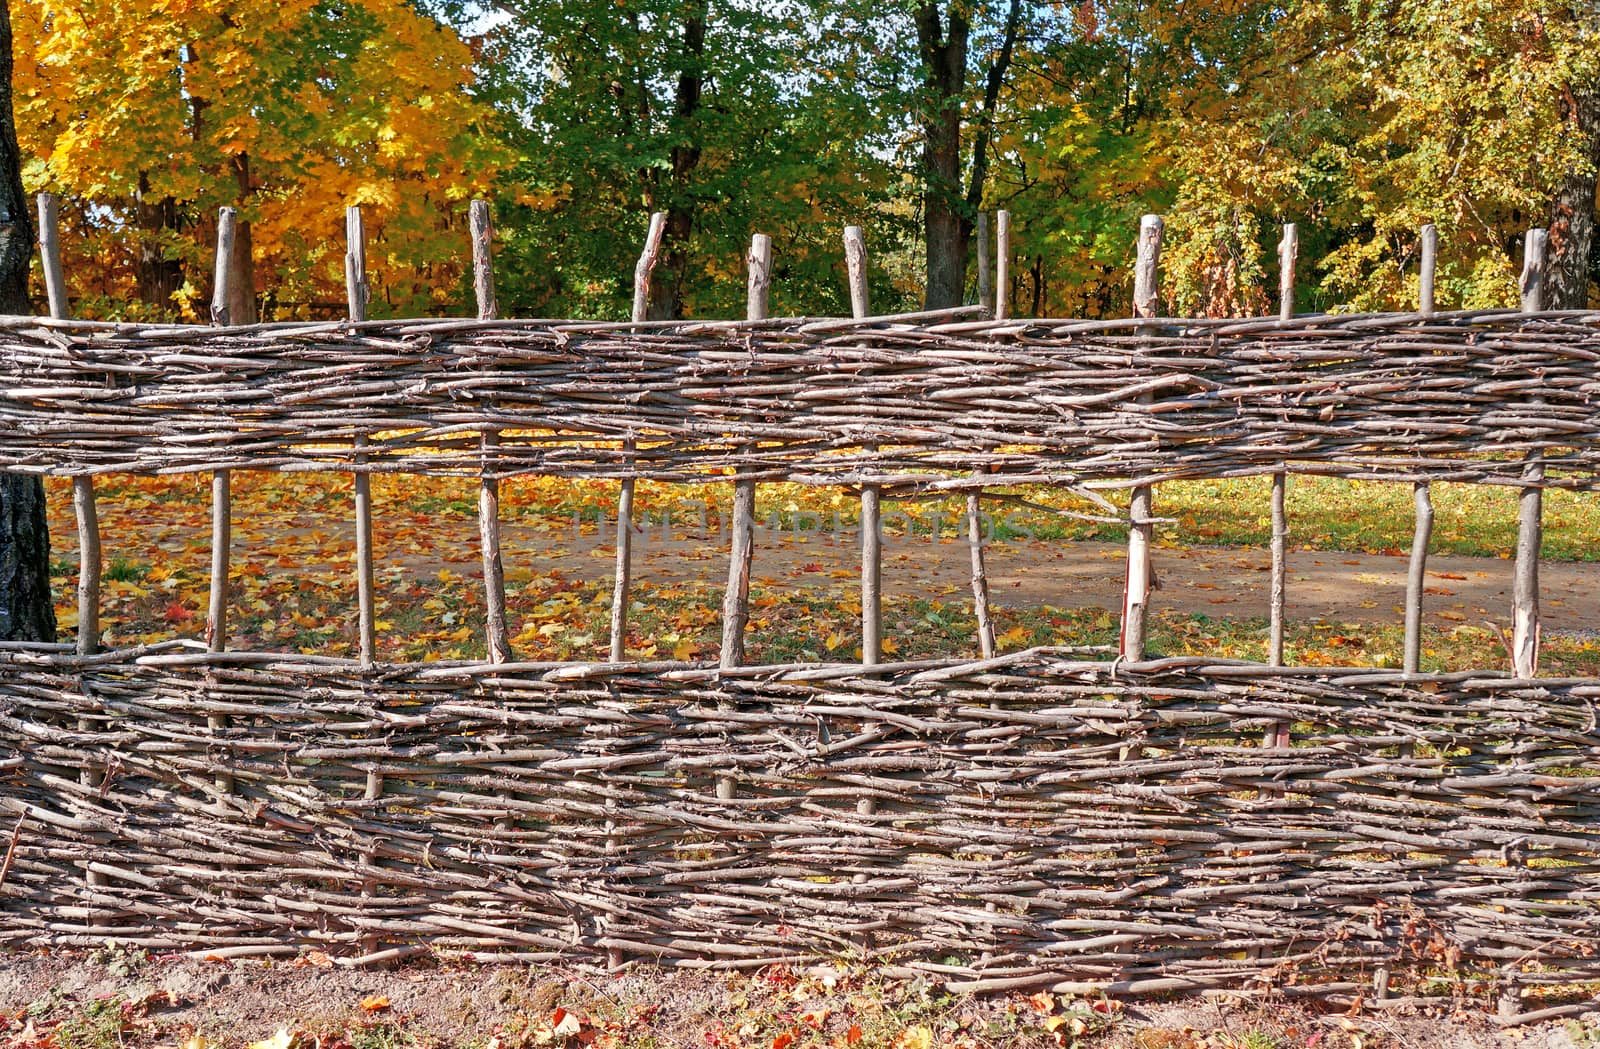 Wicker fence against the backdrop of autumn trees                               